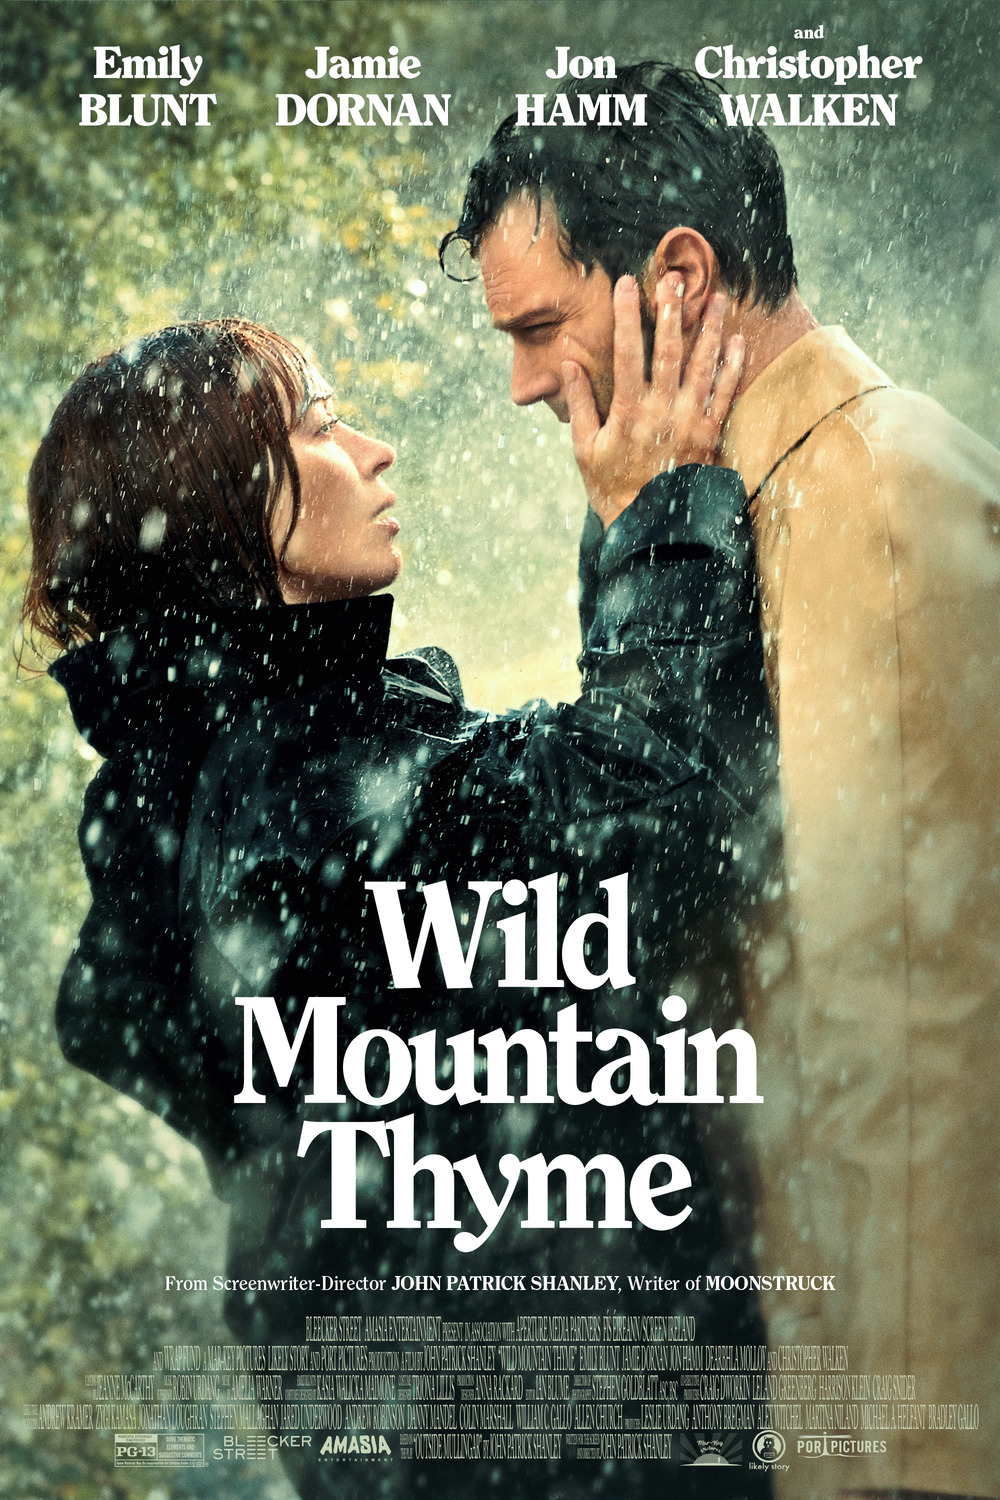 Cover Art for "Wild Mountain Thyme"